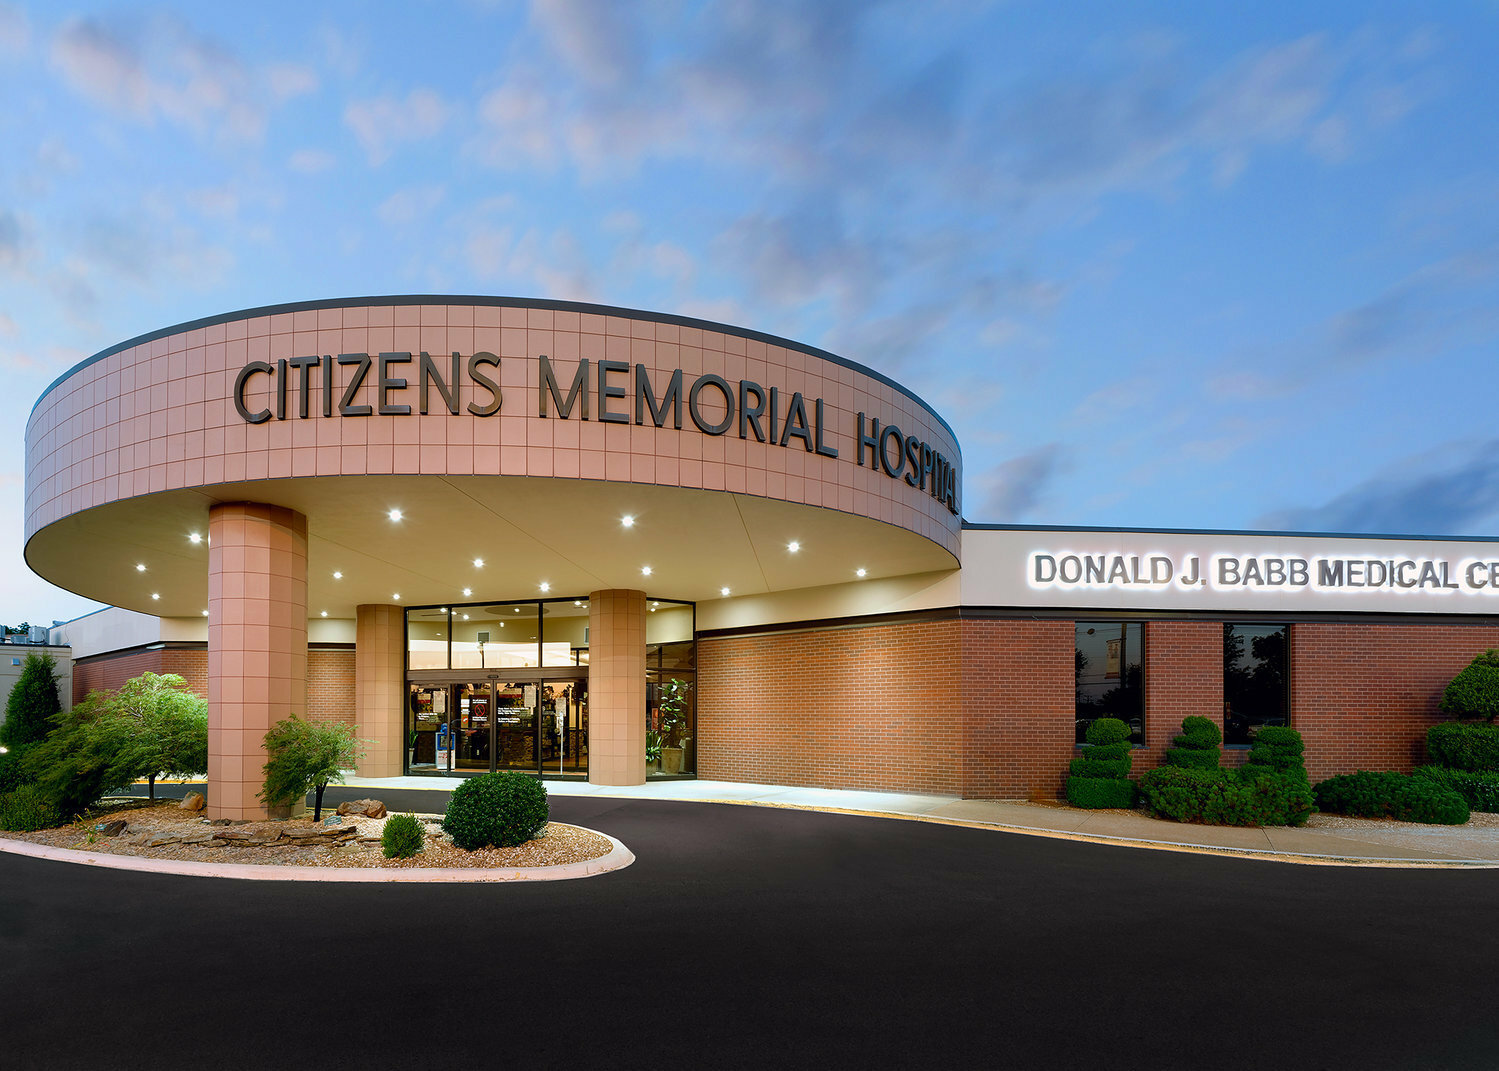 Citizens Memorial Hospital is set to receive $500,000 for a neonatal abstinence syndrome initiative.